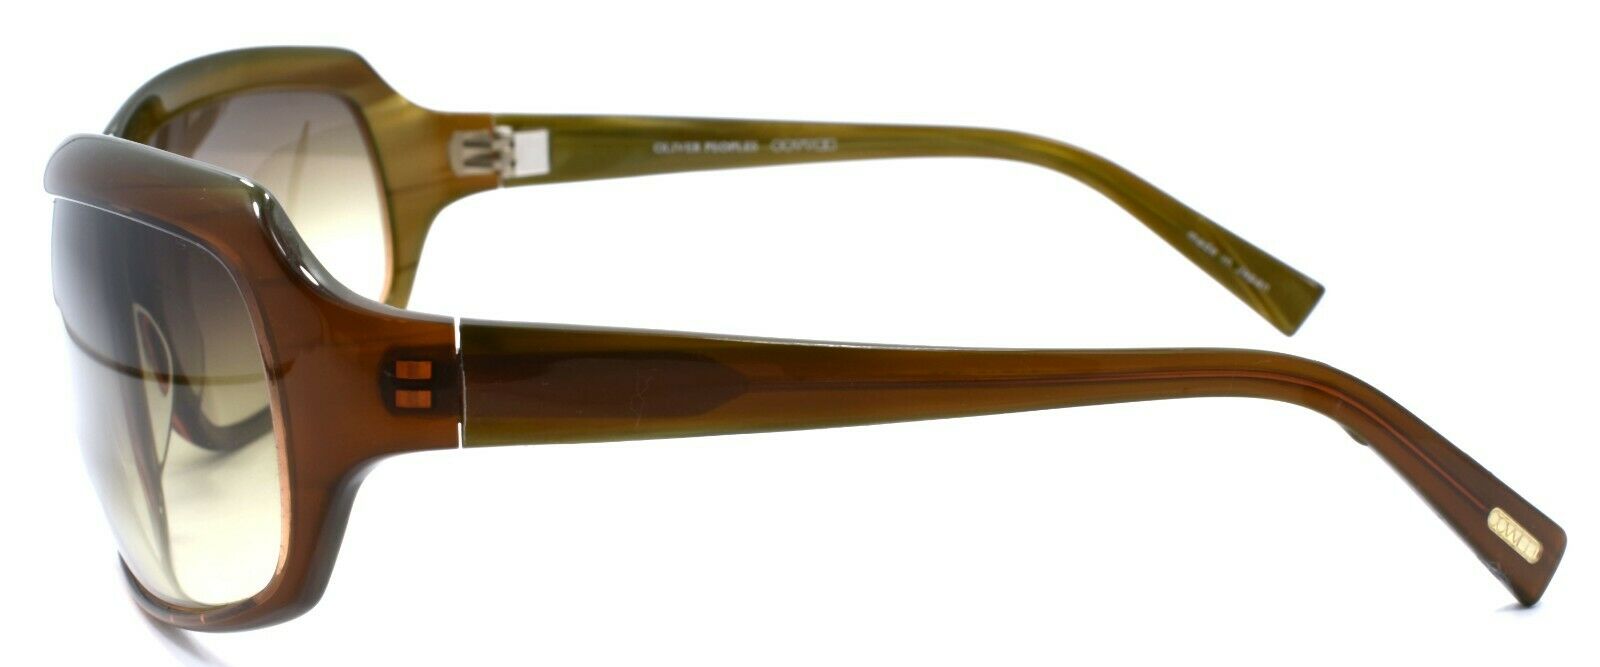 3-Oliver Peoples Bella-Donna JAS Women's Sunglasses Brown & Green / Green Gradient-Does not apply-IKSpecs